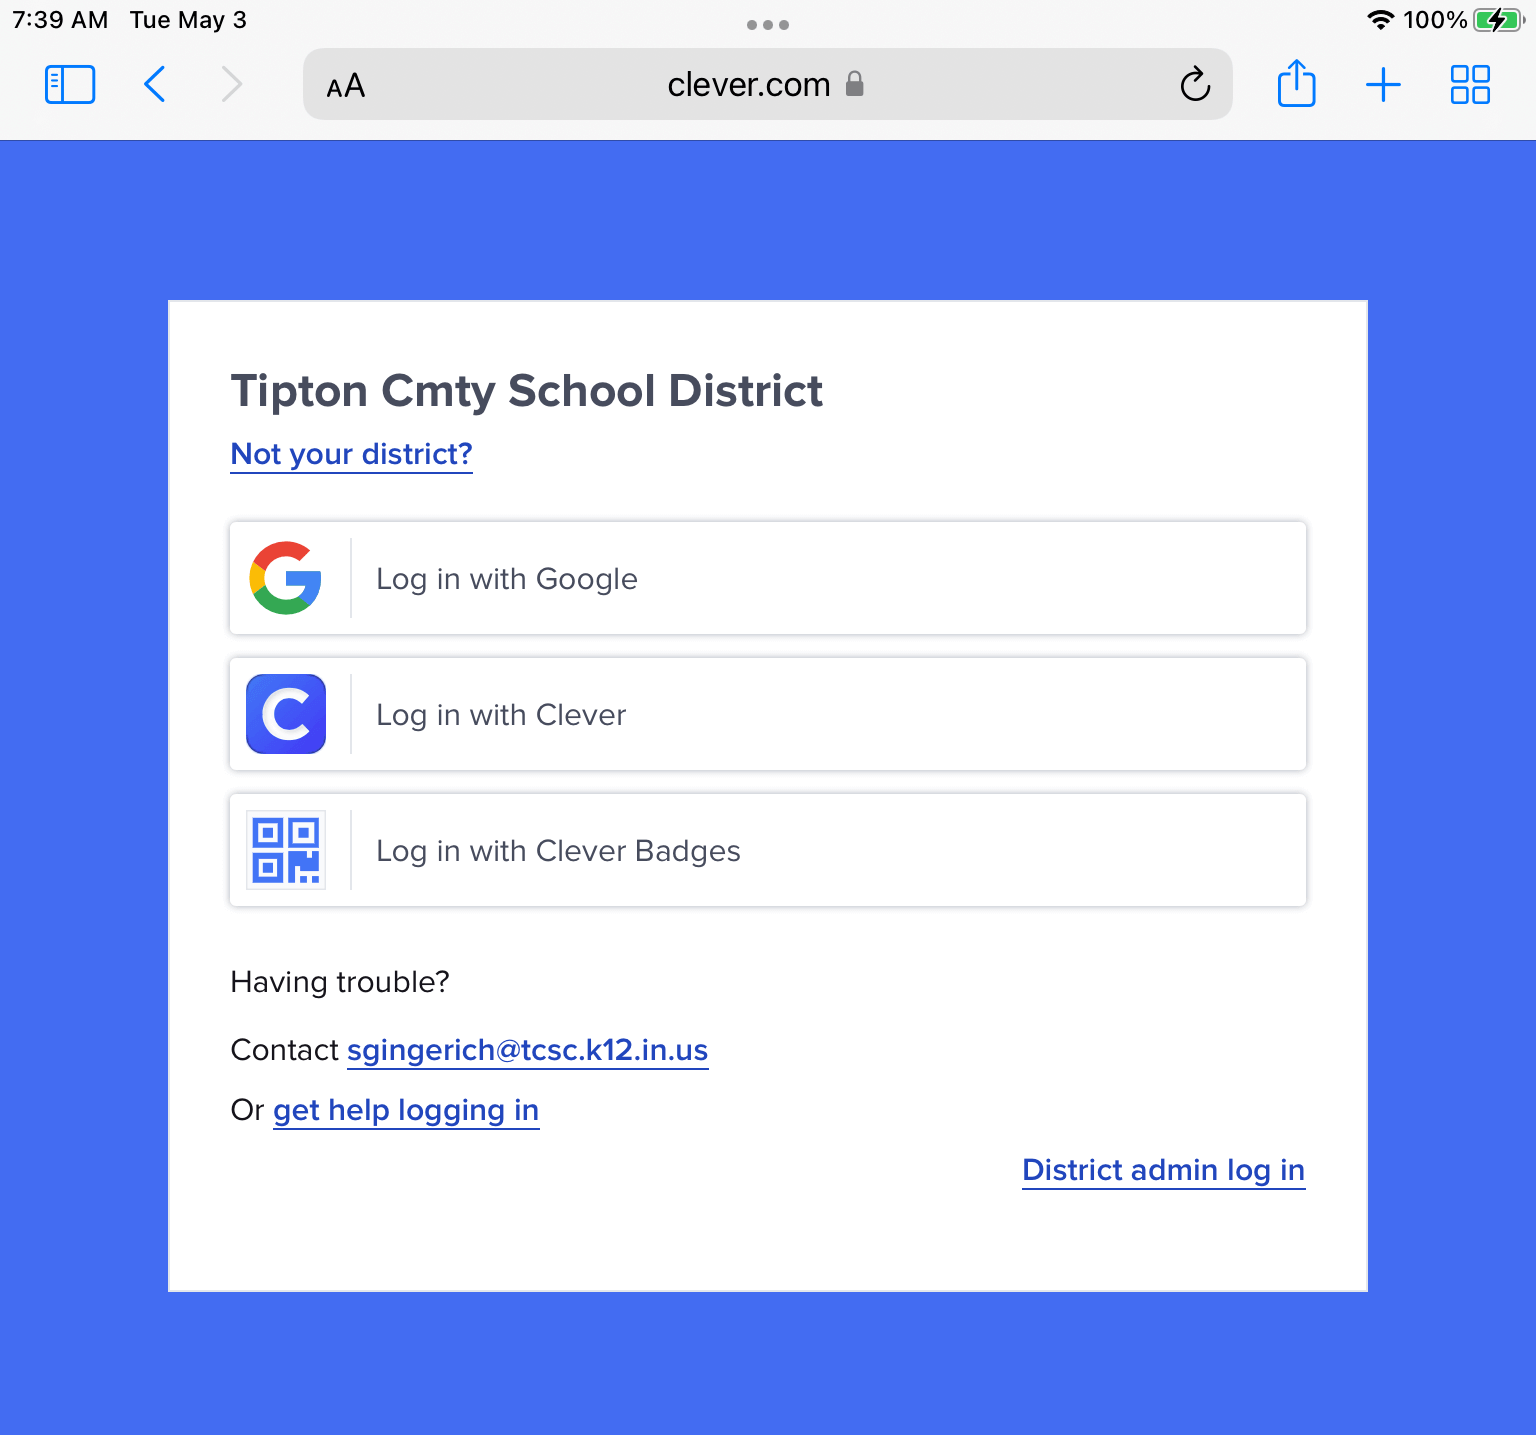 Screenshot showing different ways students can sign in to Clever, including Google, Clever, and Clever Badges.